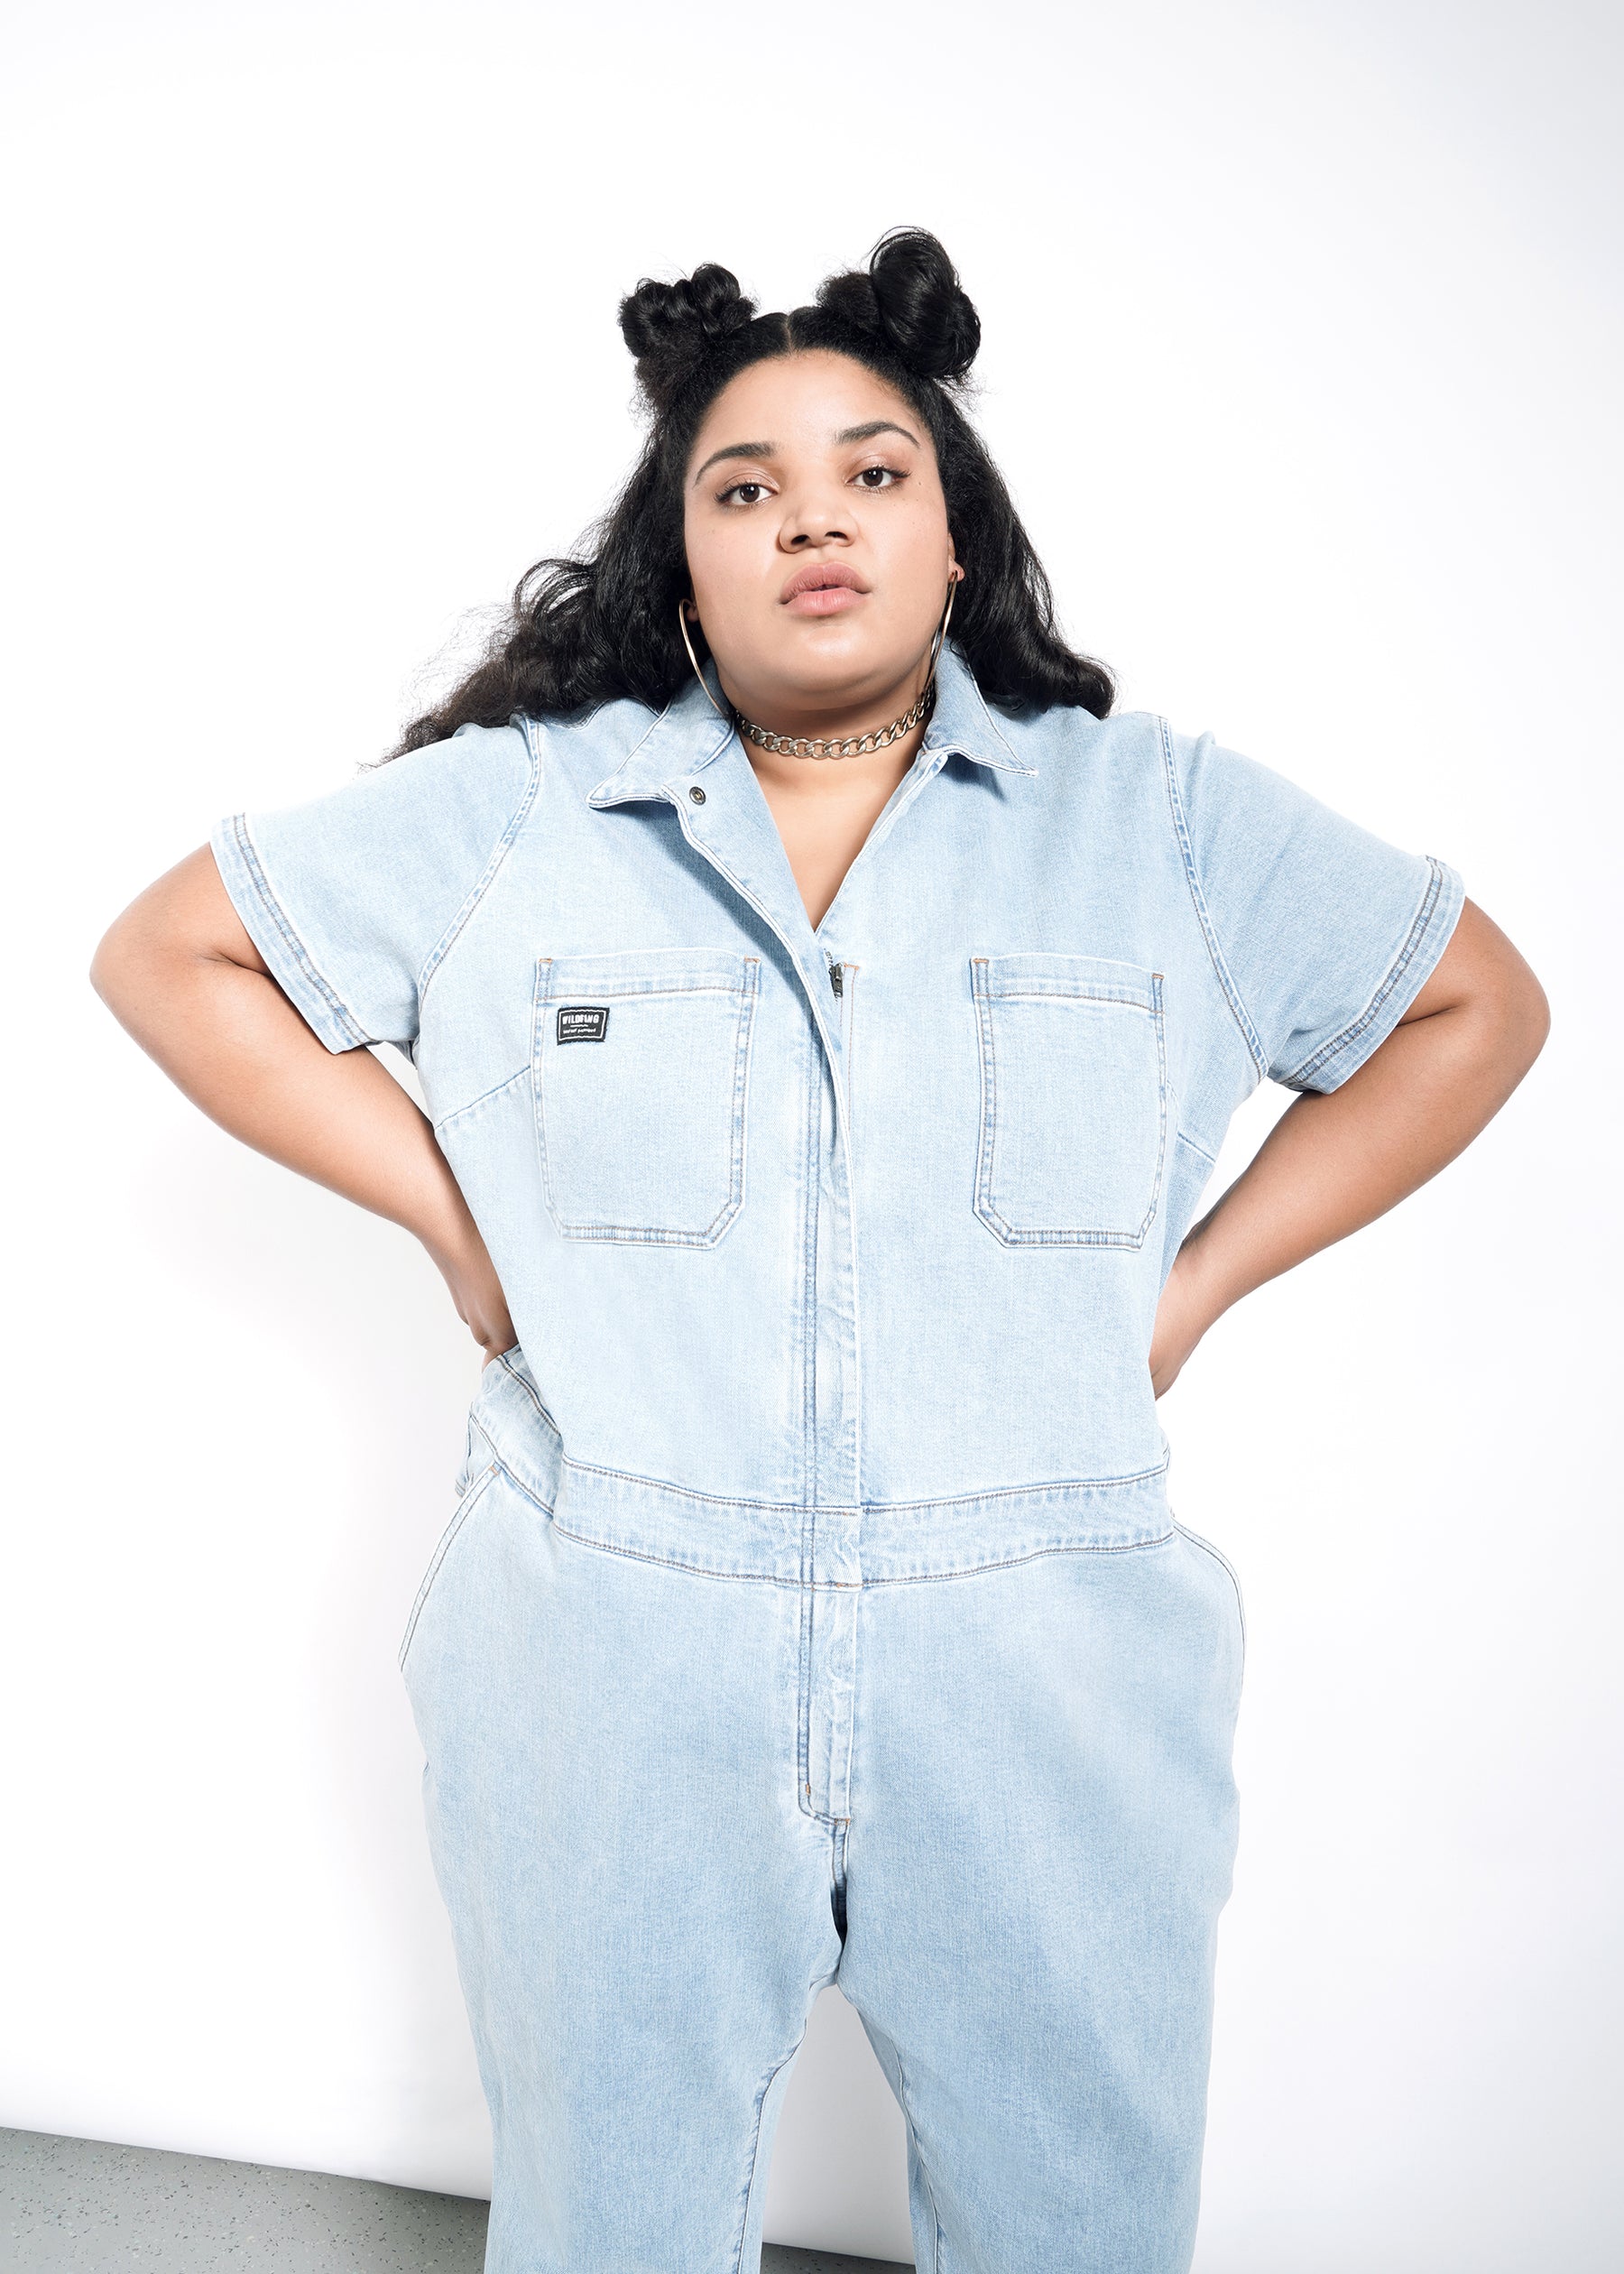 BUTTON-UPS | WILDFANG - Style + Culture for the Modern Feminist - Wildfang